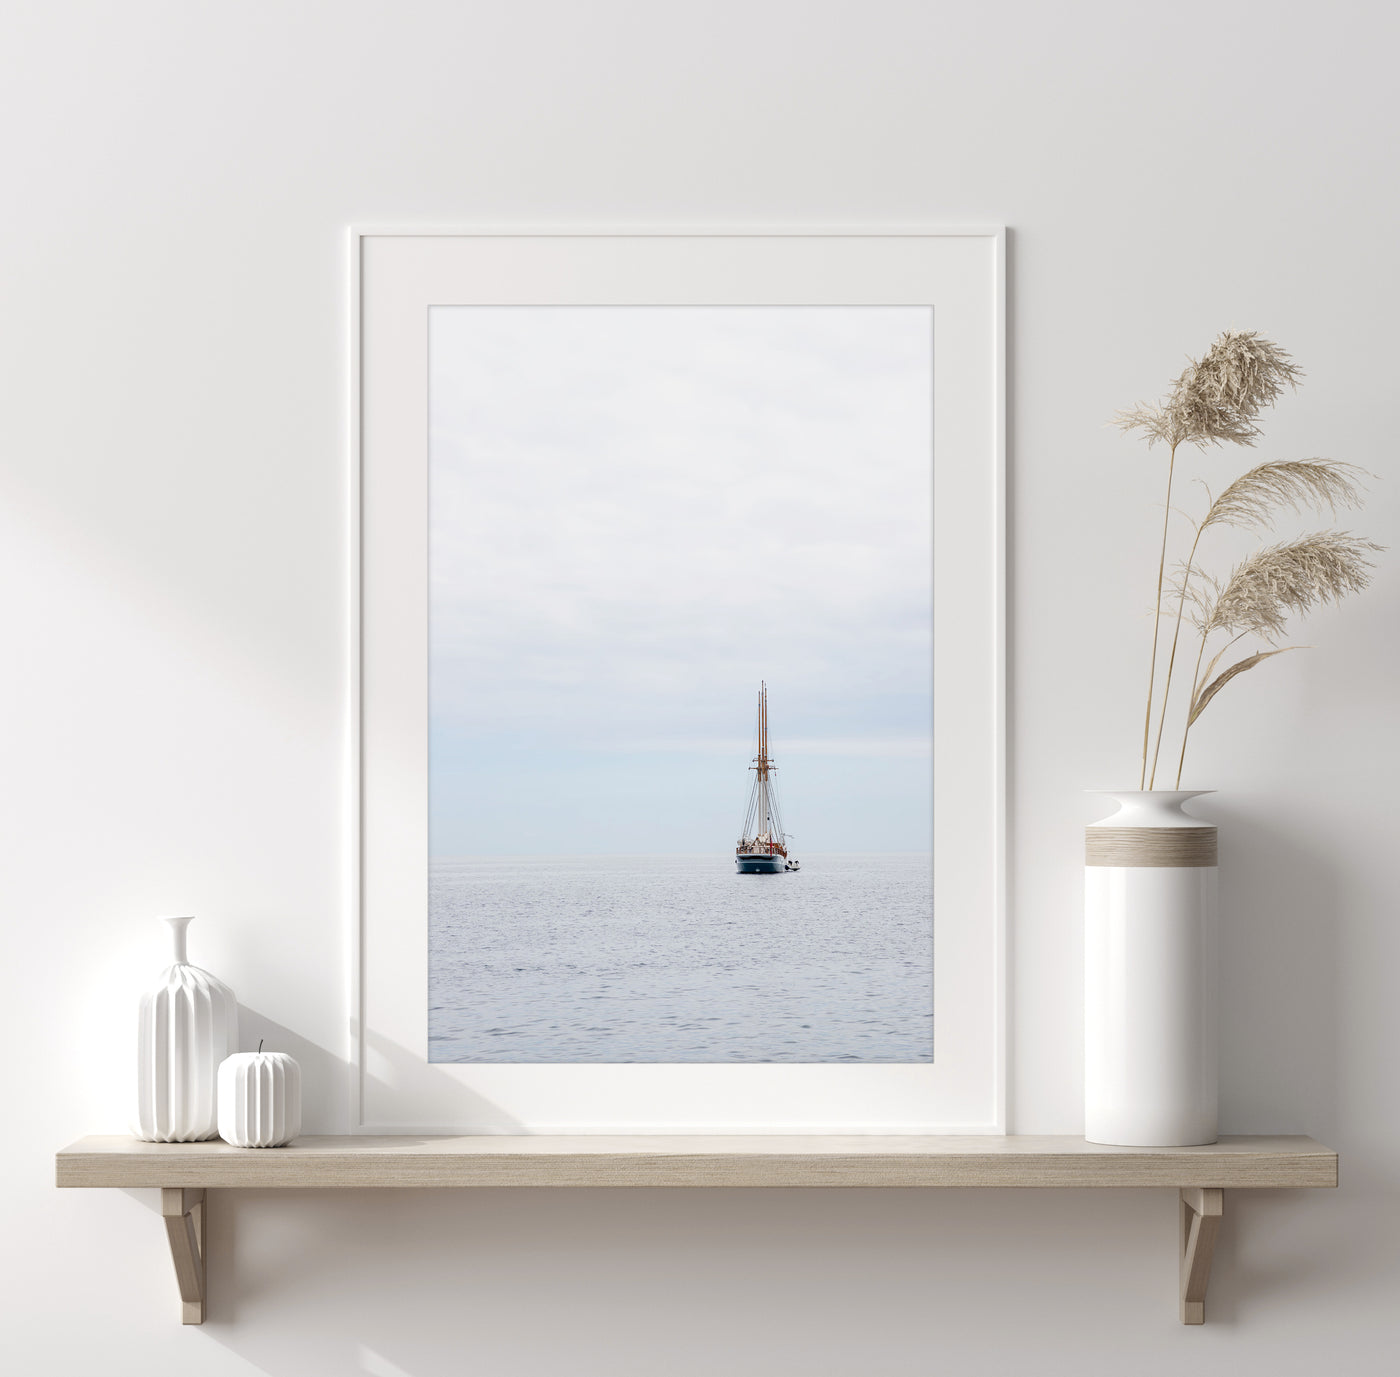 Three-masted ship in the Mediterranean - Fine art print by Cattie Coyle Photography